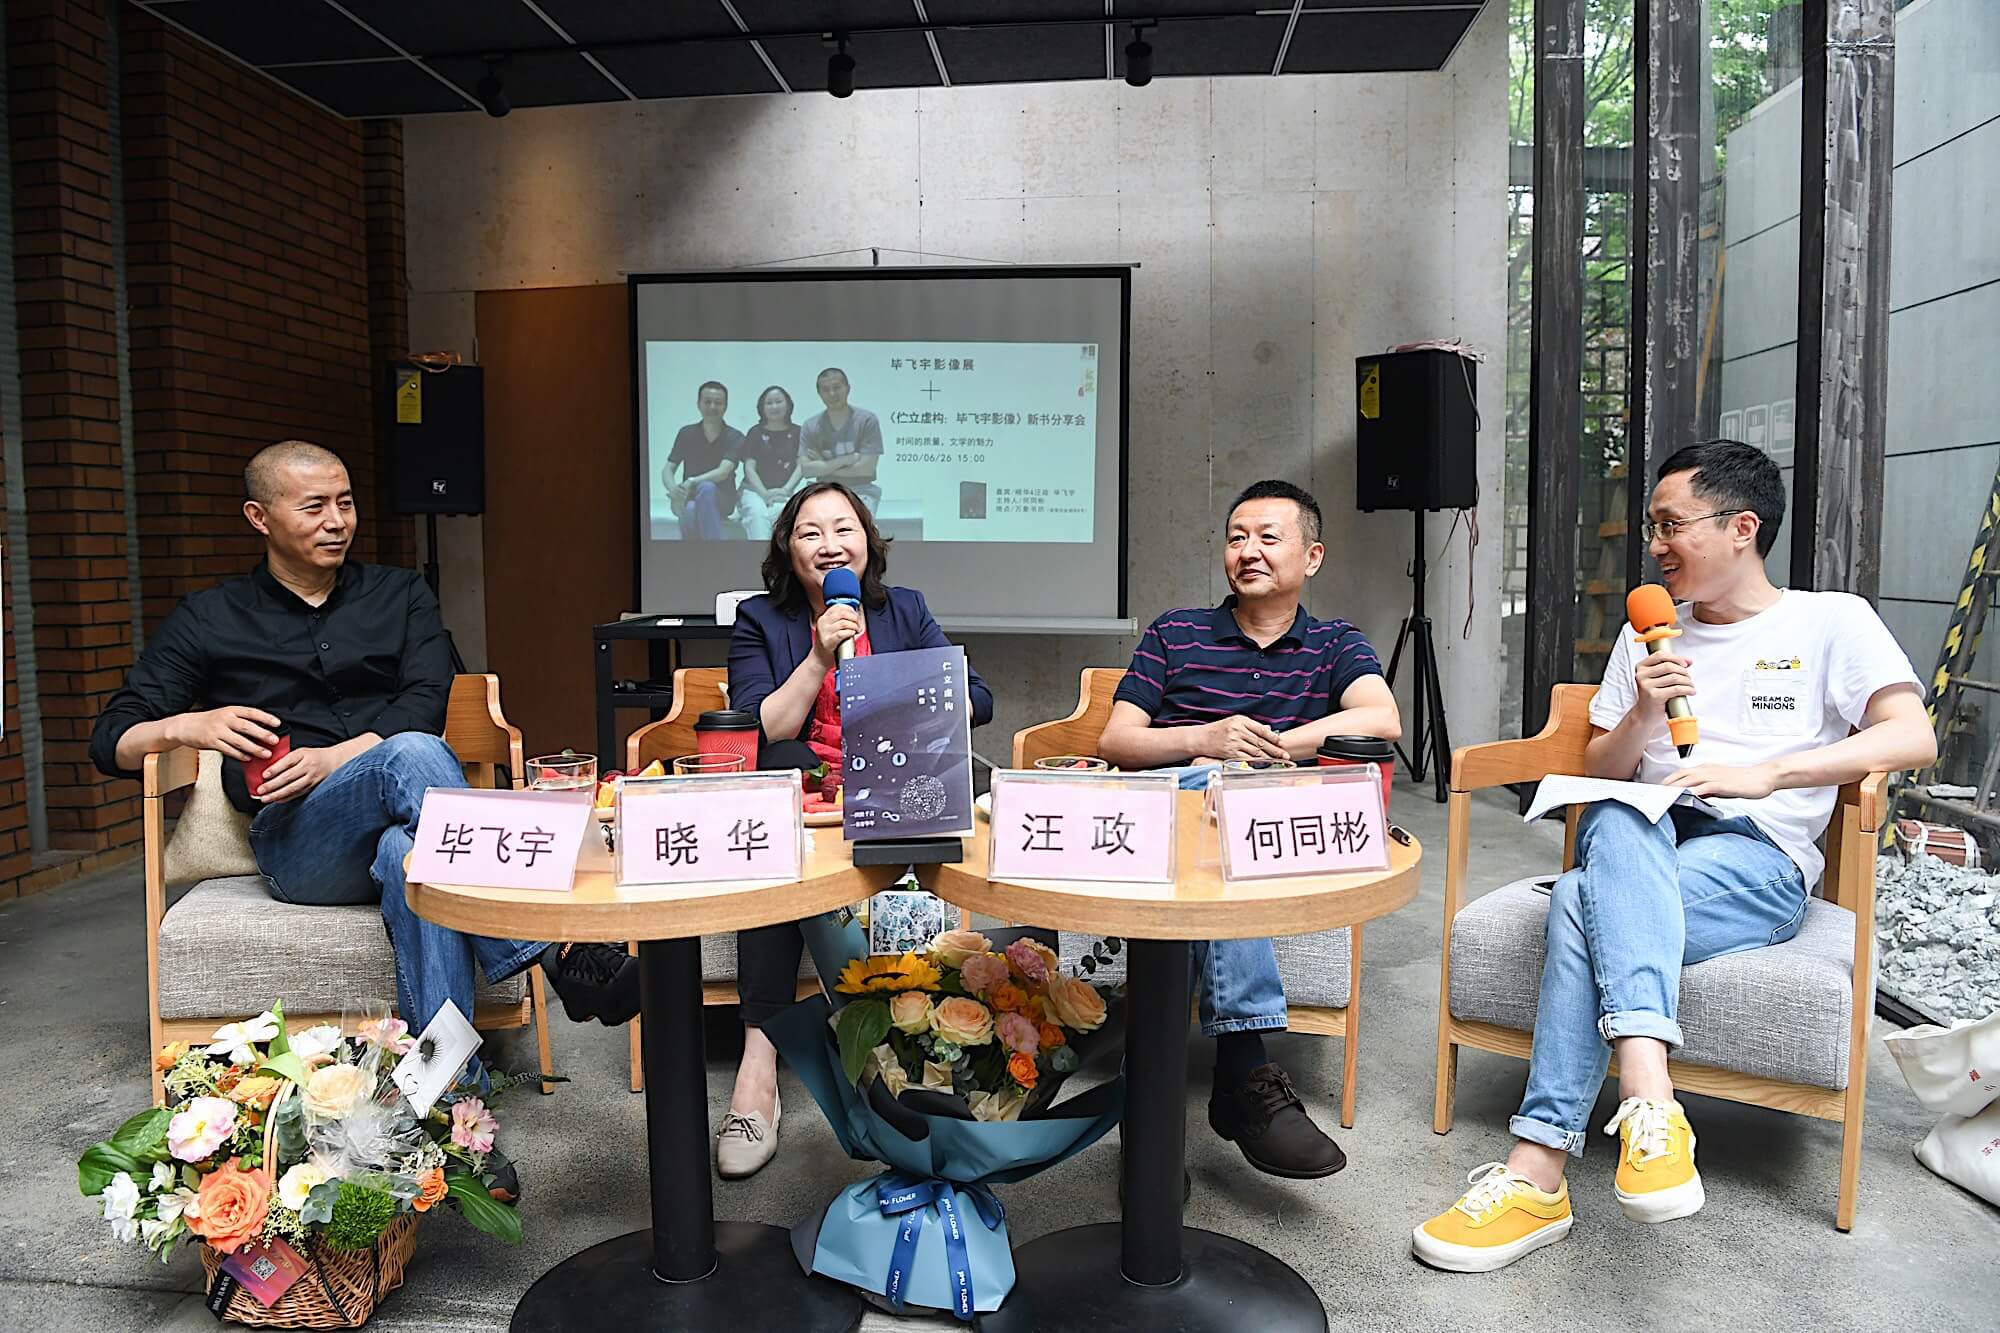 The Sharing Salon of Standing inside Fiction: Images of Bi Feiyu was held in Nanjing